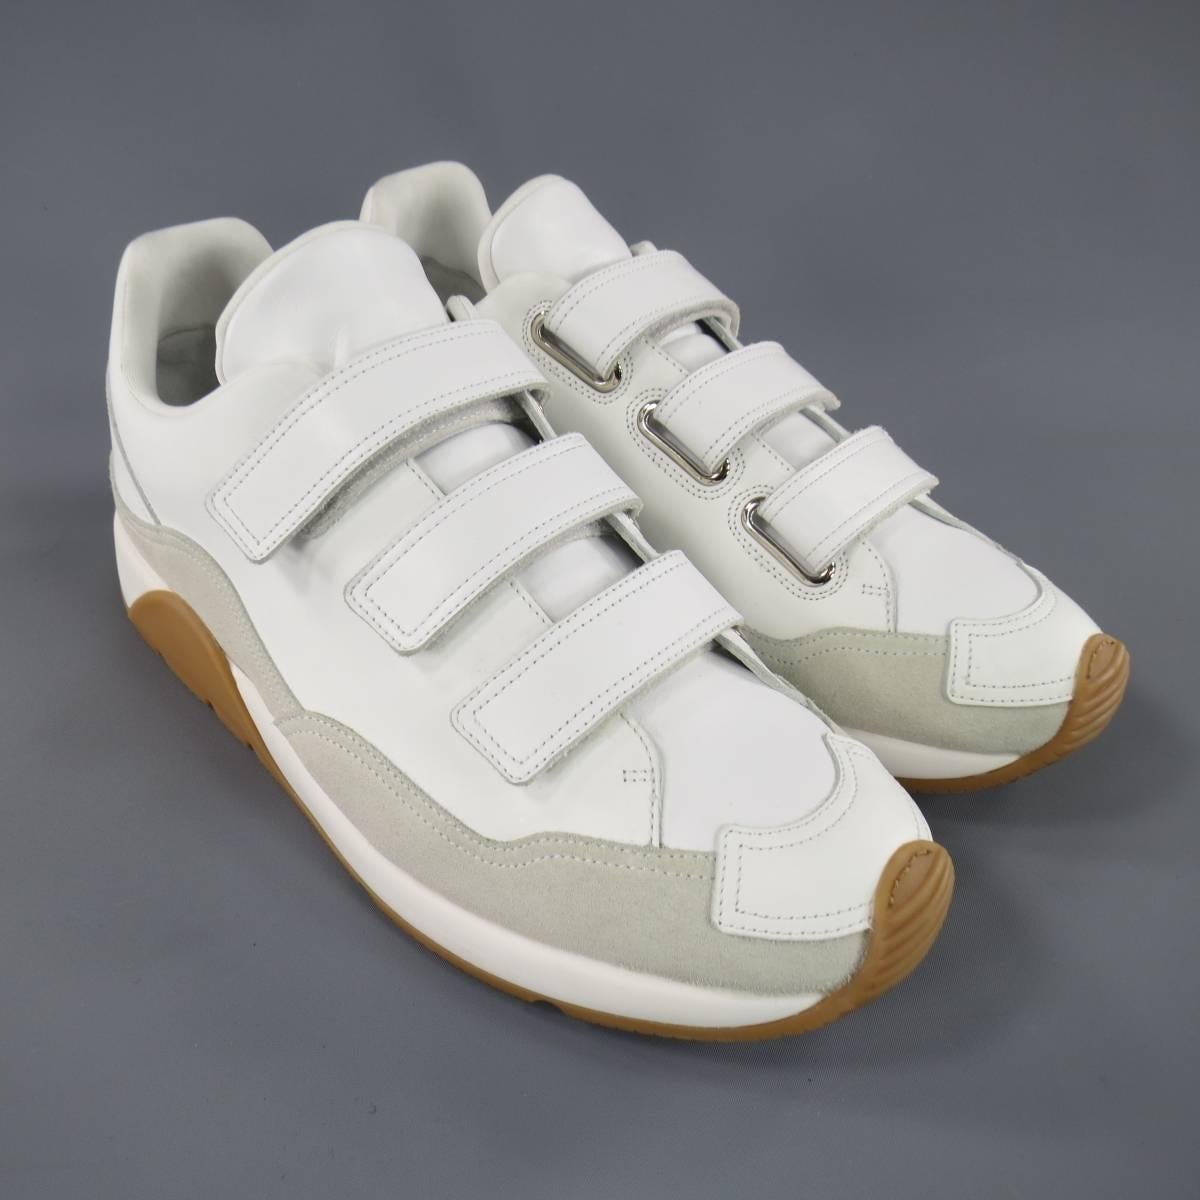 Brand New DIOR HOMME Sneakers consists of leather material in a white color tone. Designed in a round-toe front, velcro strap vamp-closure with tone-on-tone stitching along edges. Detailed with suede trim along sides in a light beige color and tan